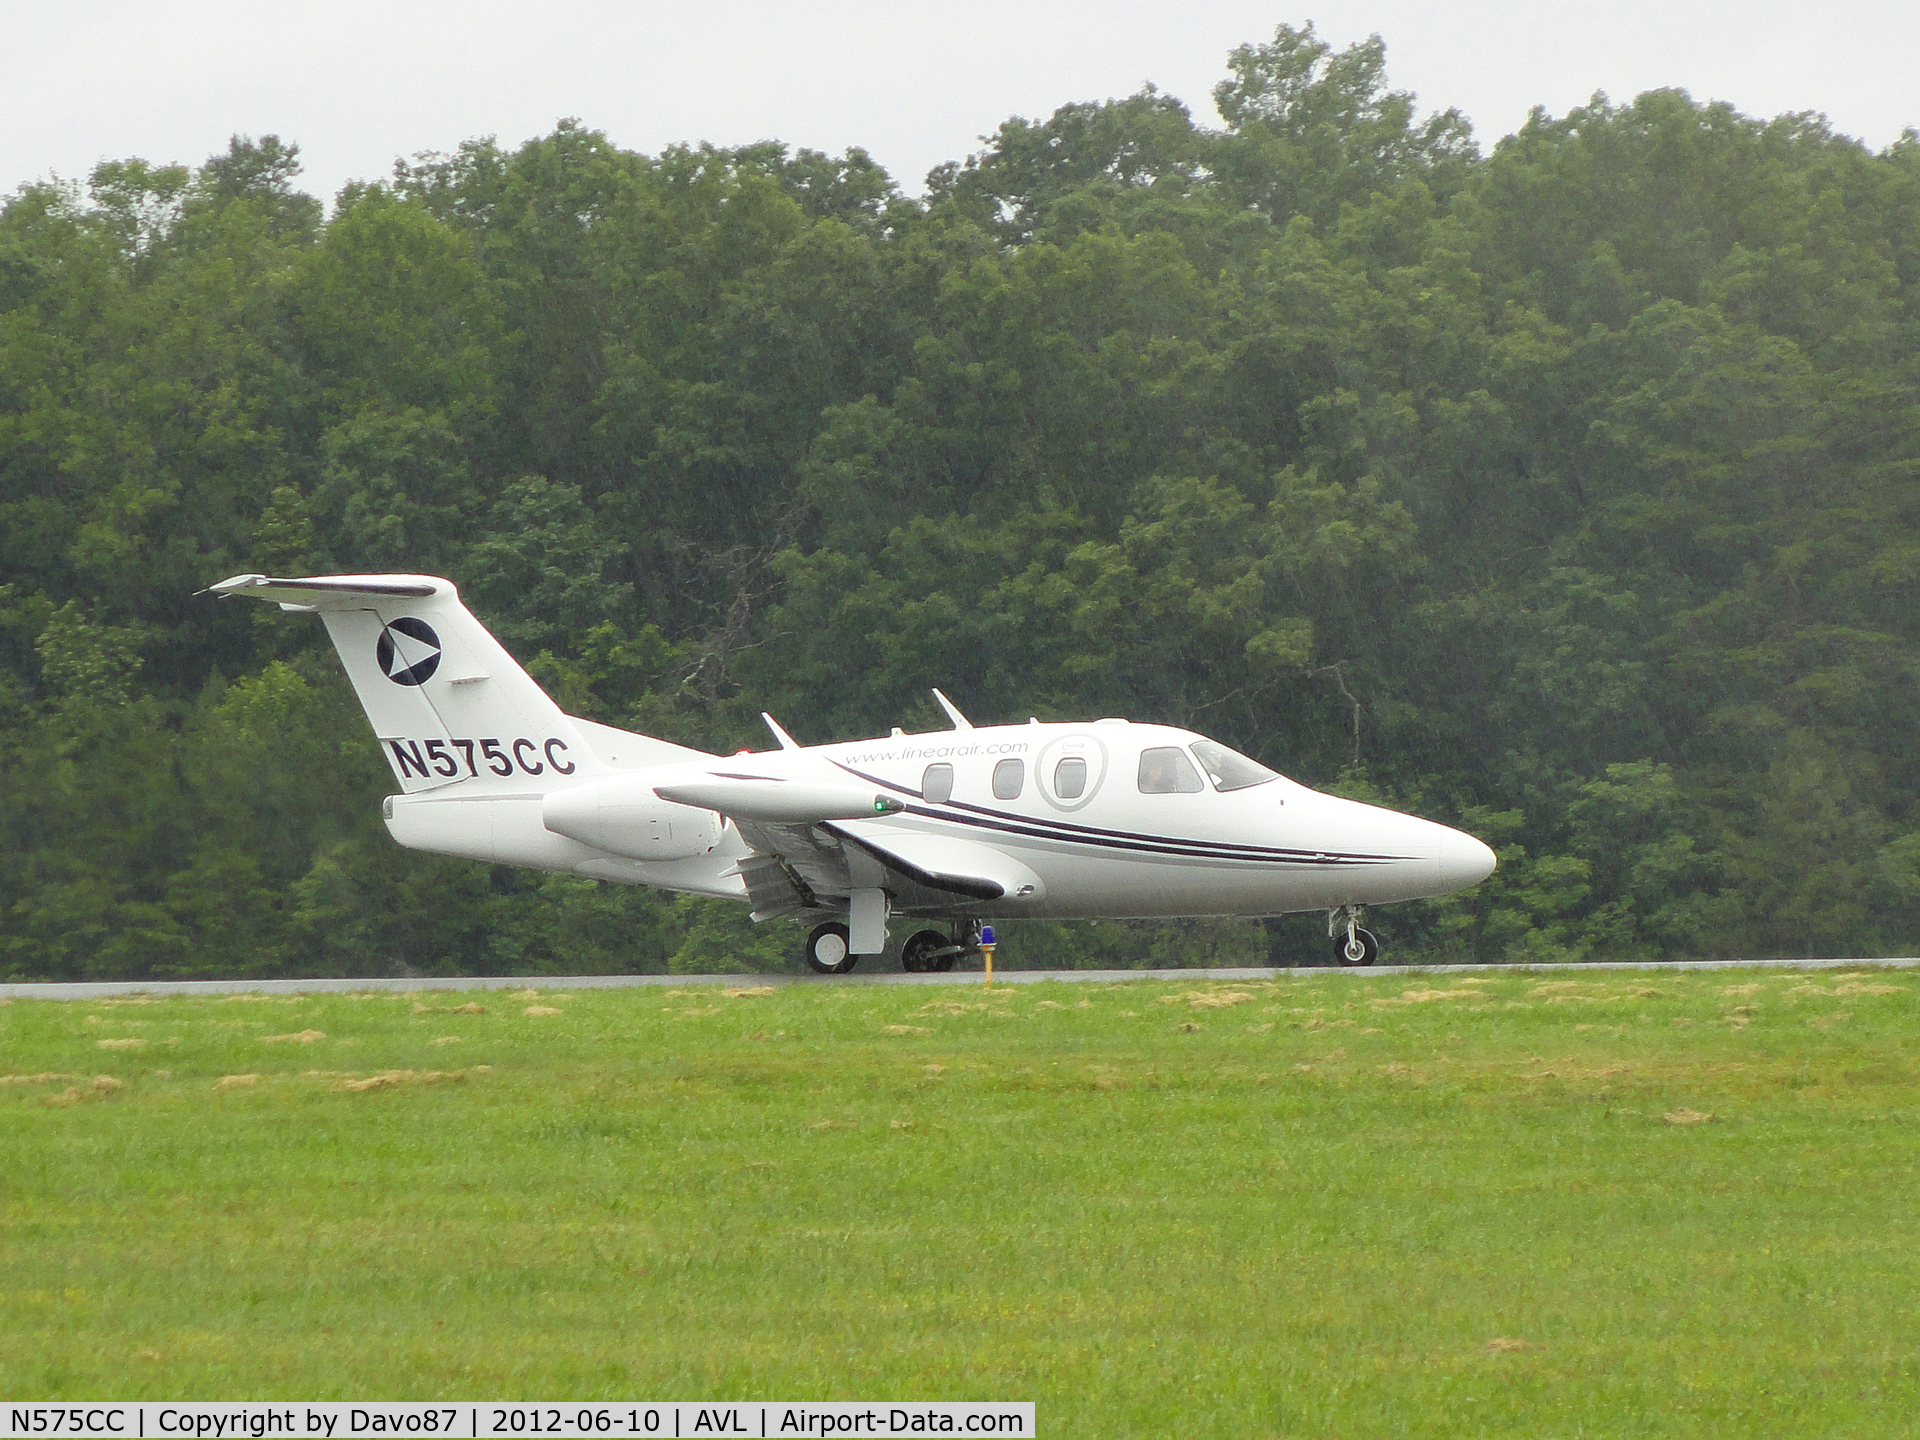 N575CC, 2007 Eclipse Aviation Corp EA500 C/N 000075, Landing at Asheville, NC airport in the rain on June 10, 2012.